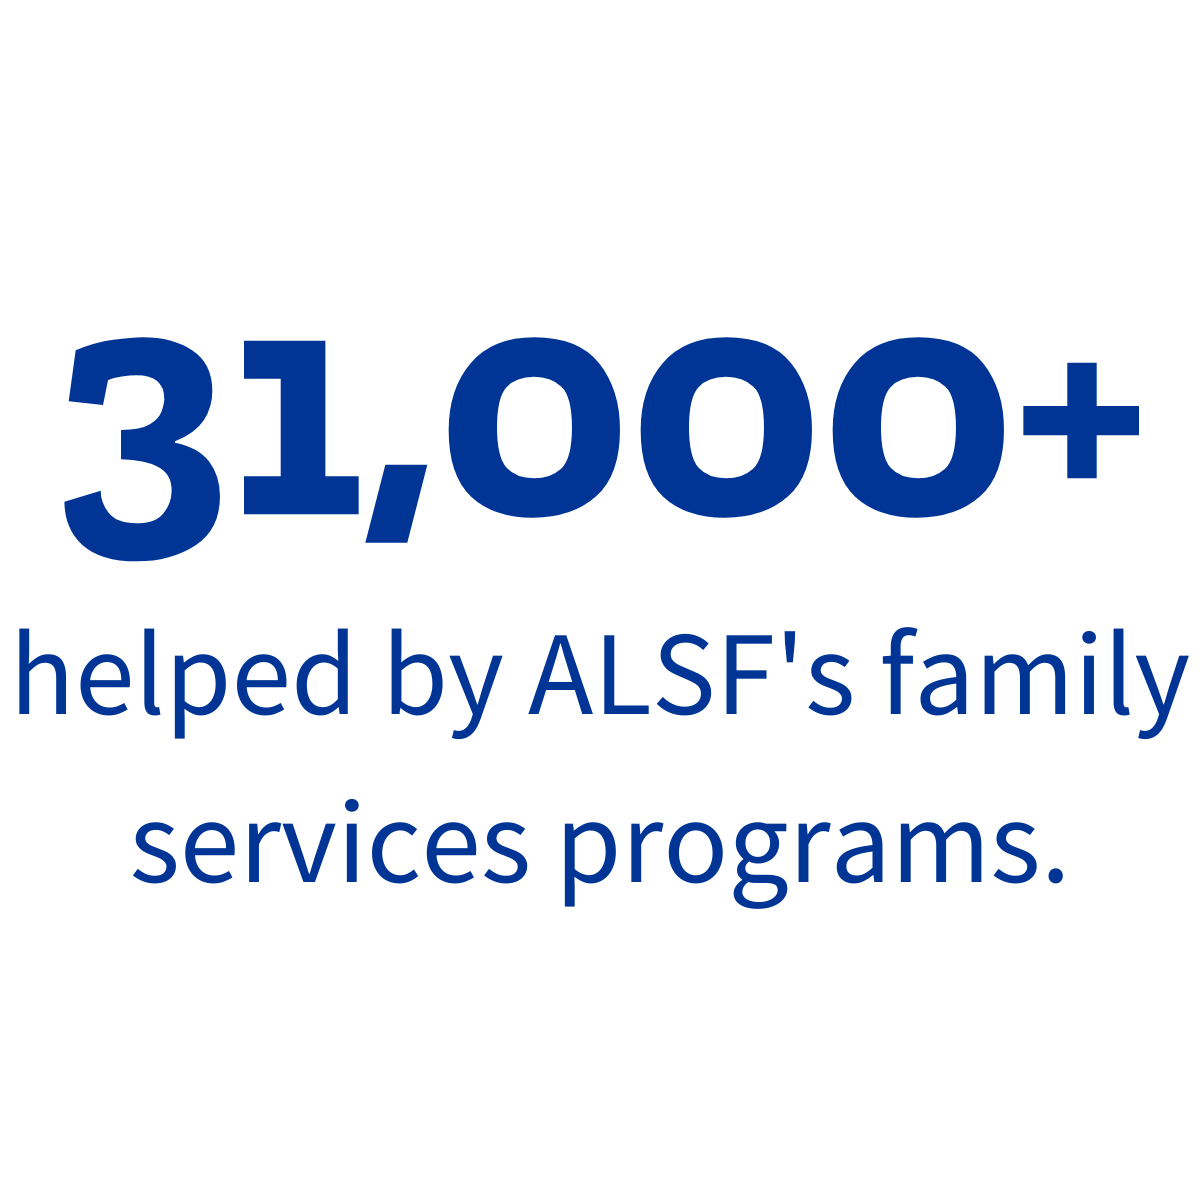 31,000+ helped by ALSF's family service programs